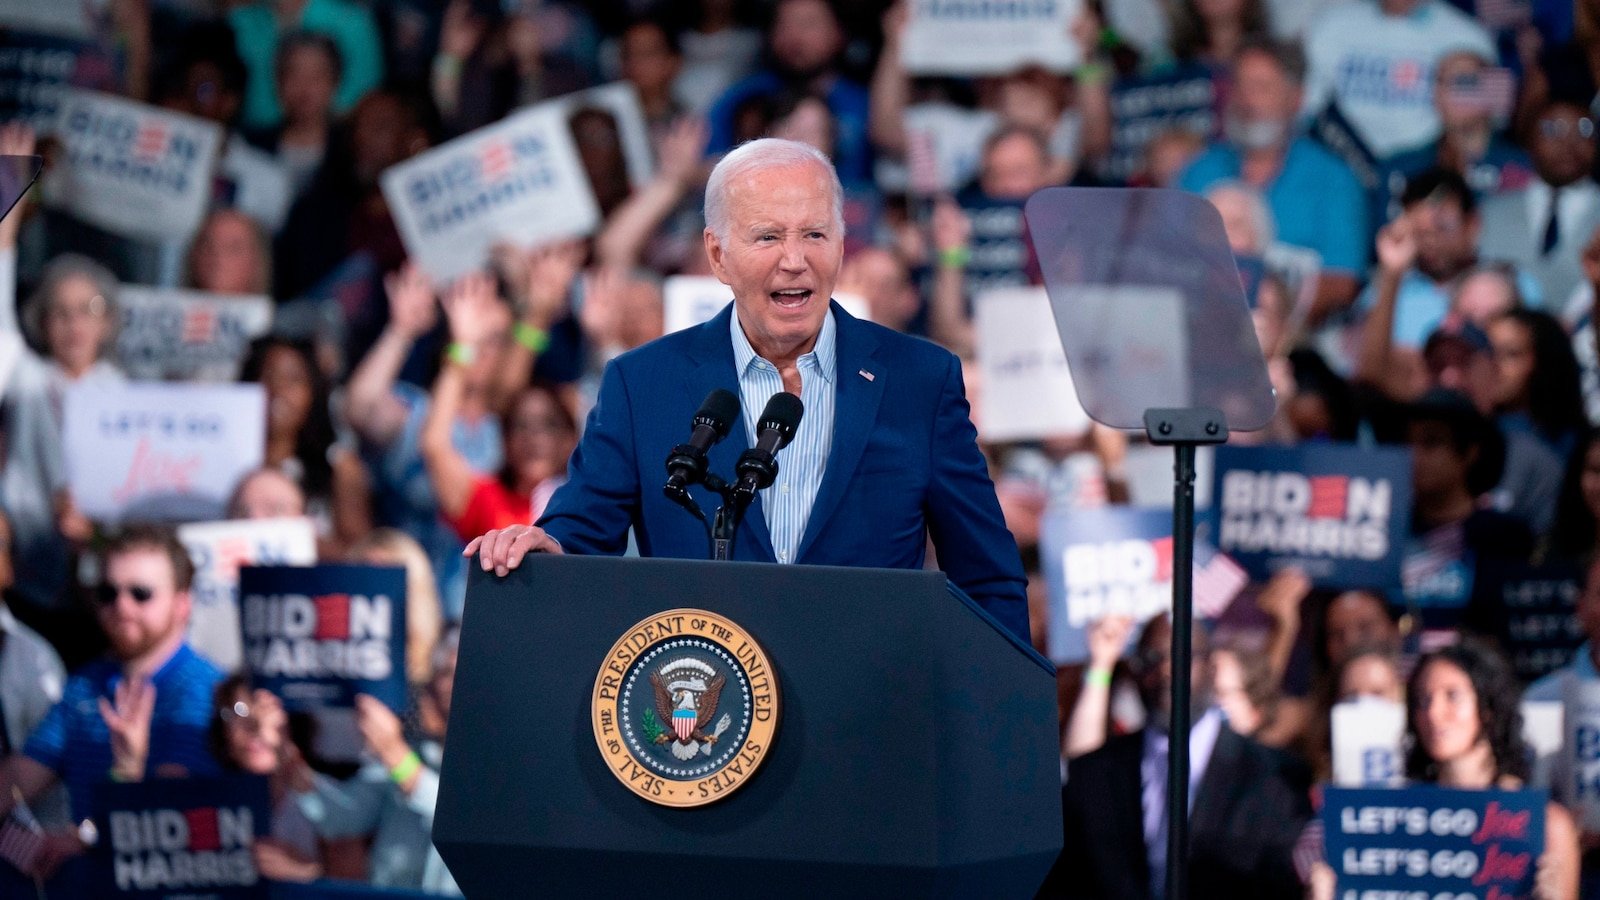 Biden campaign outraised Trump in June fundraising haul